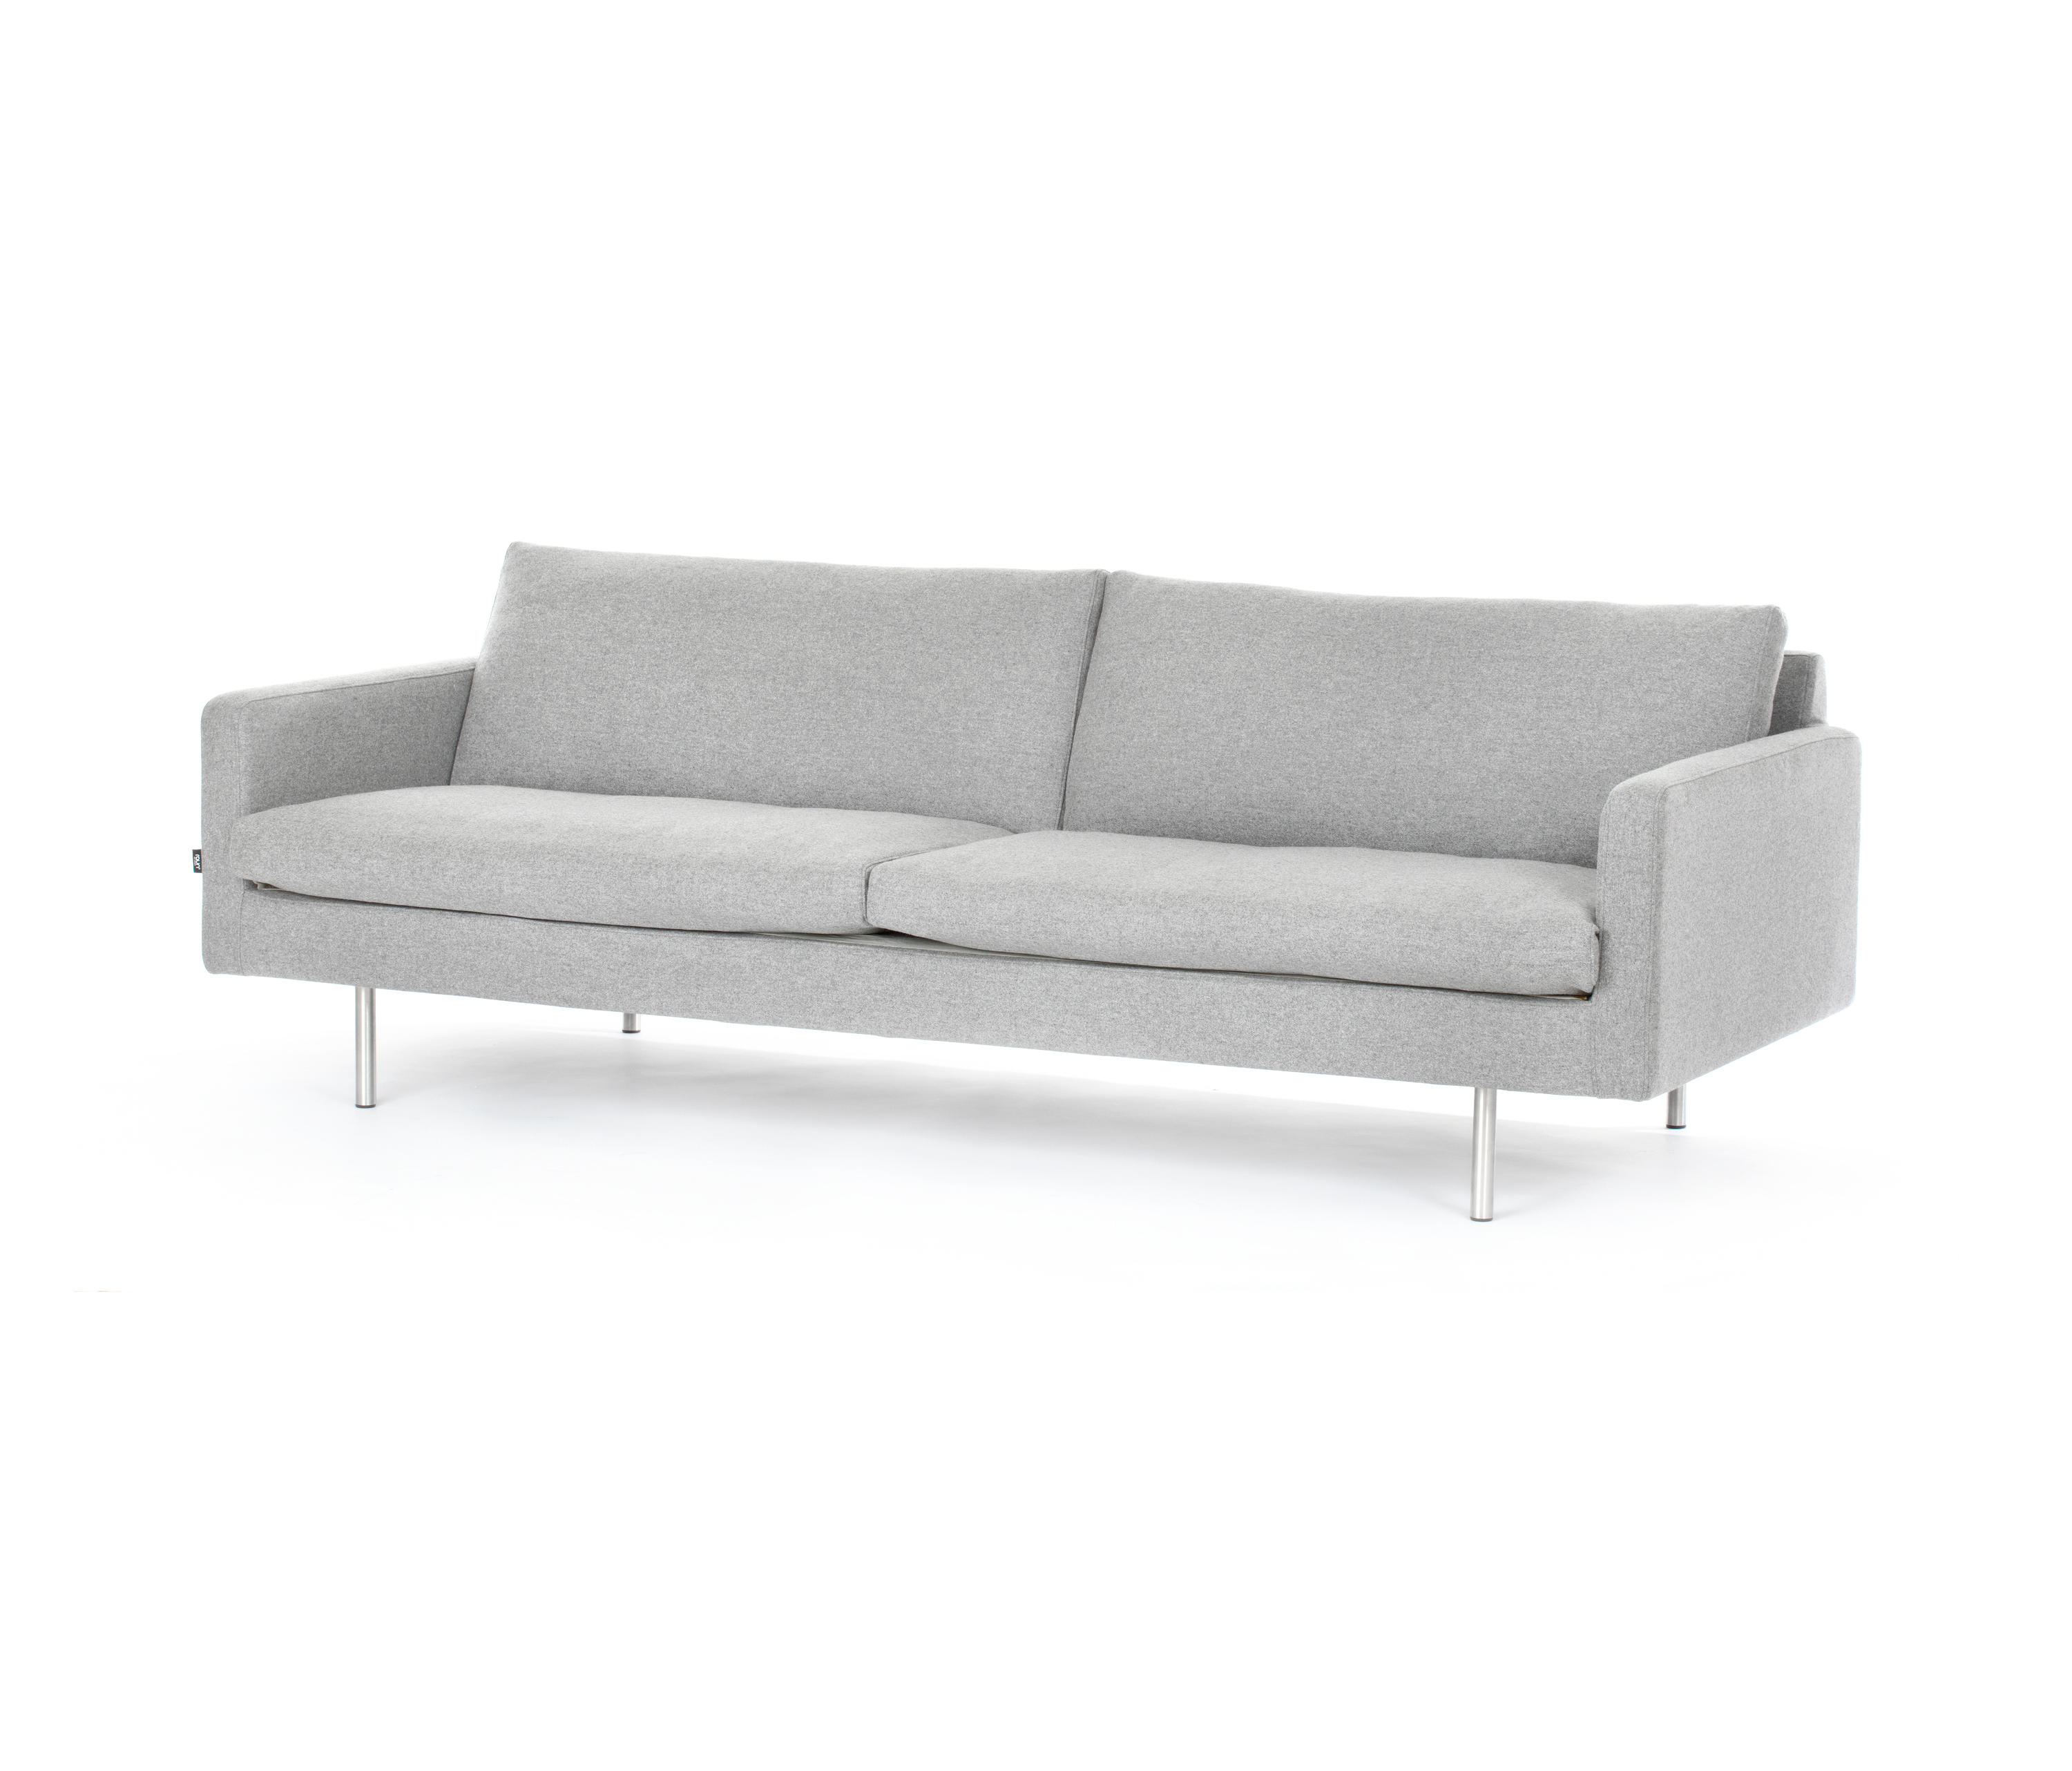 Less Sofas From Raun Architonic